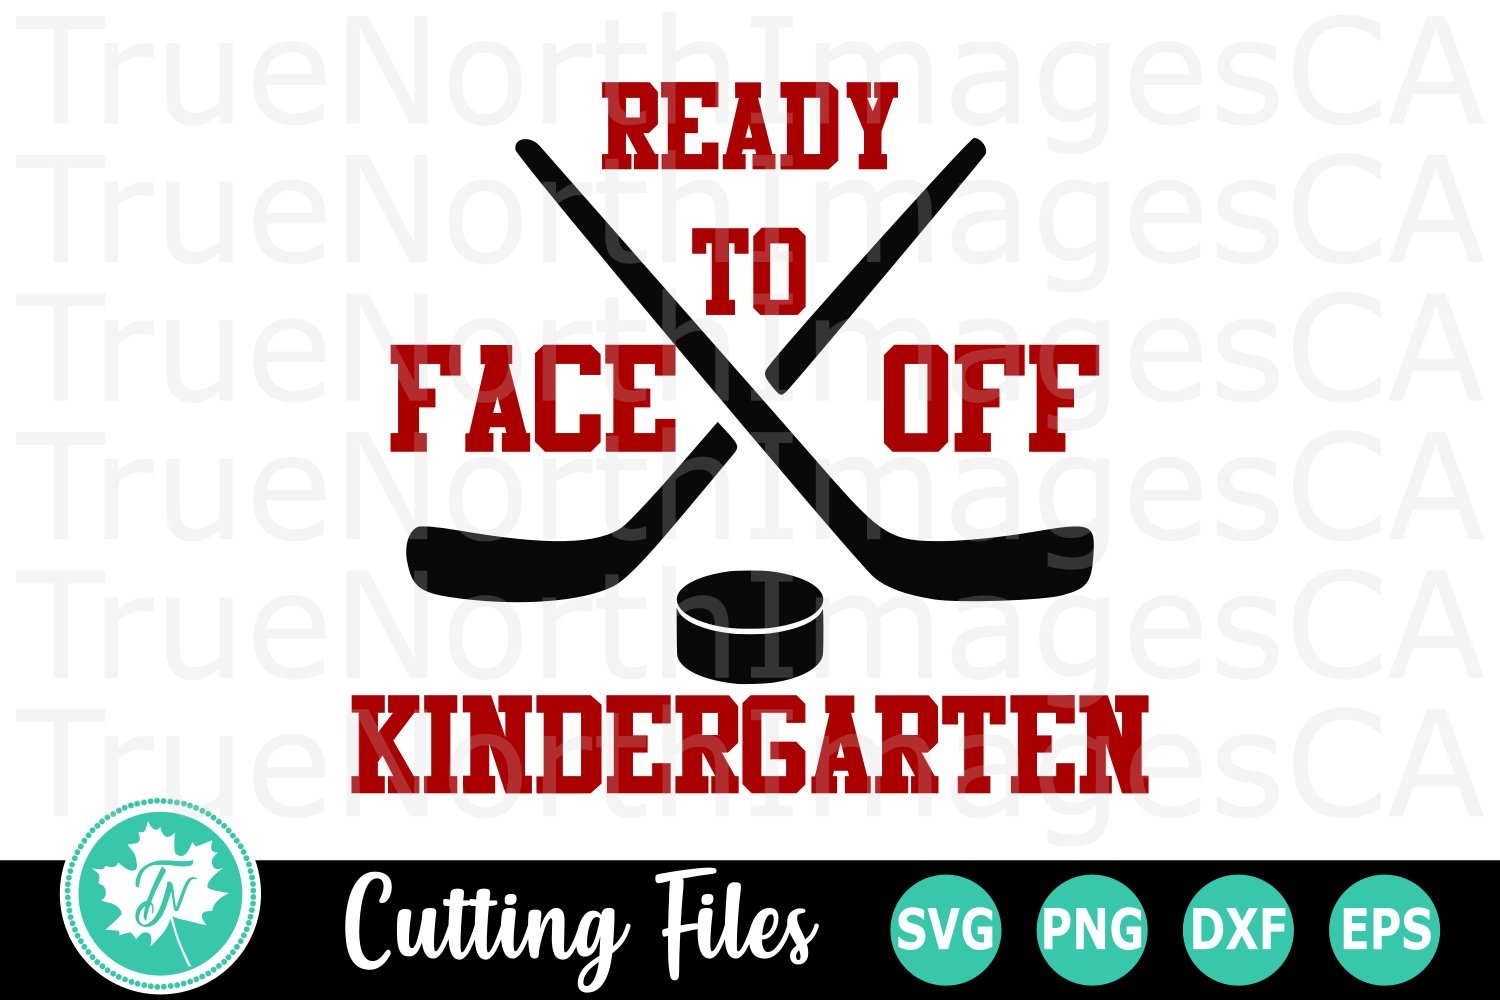 Download Ready to Face off Kindergarten - A School SVG Cut File ...